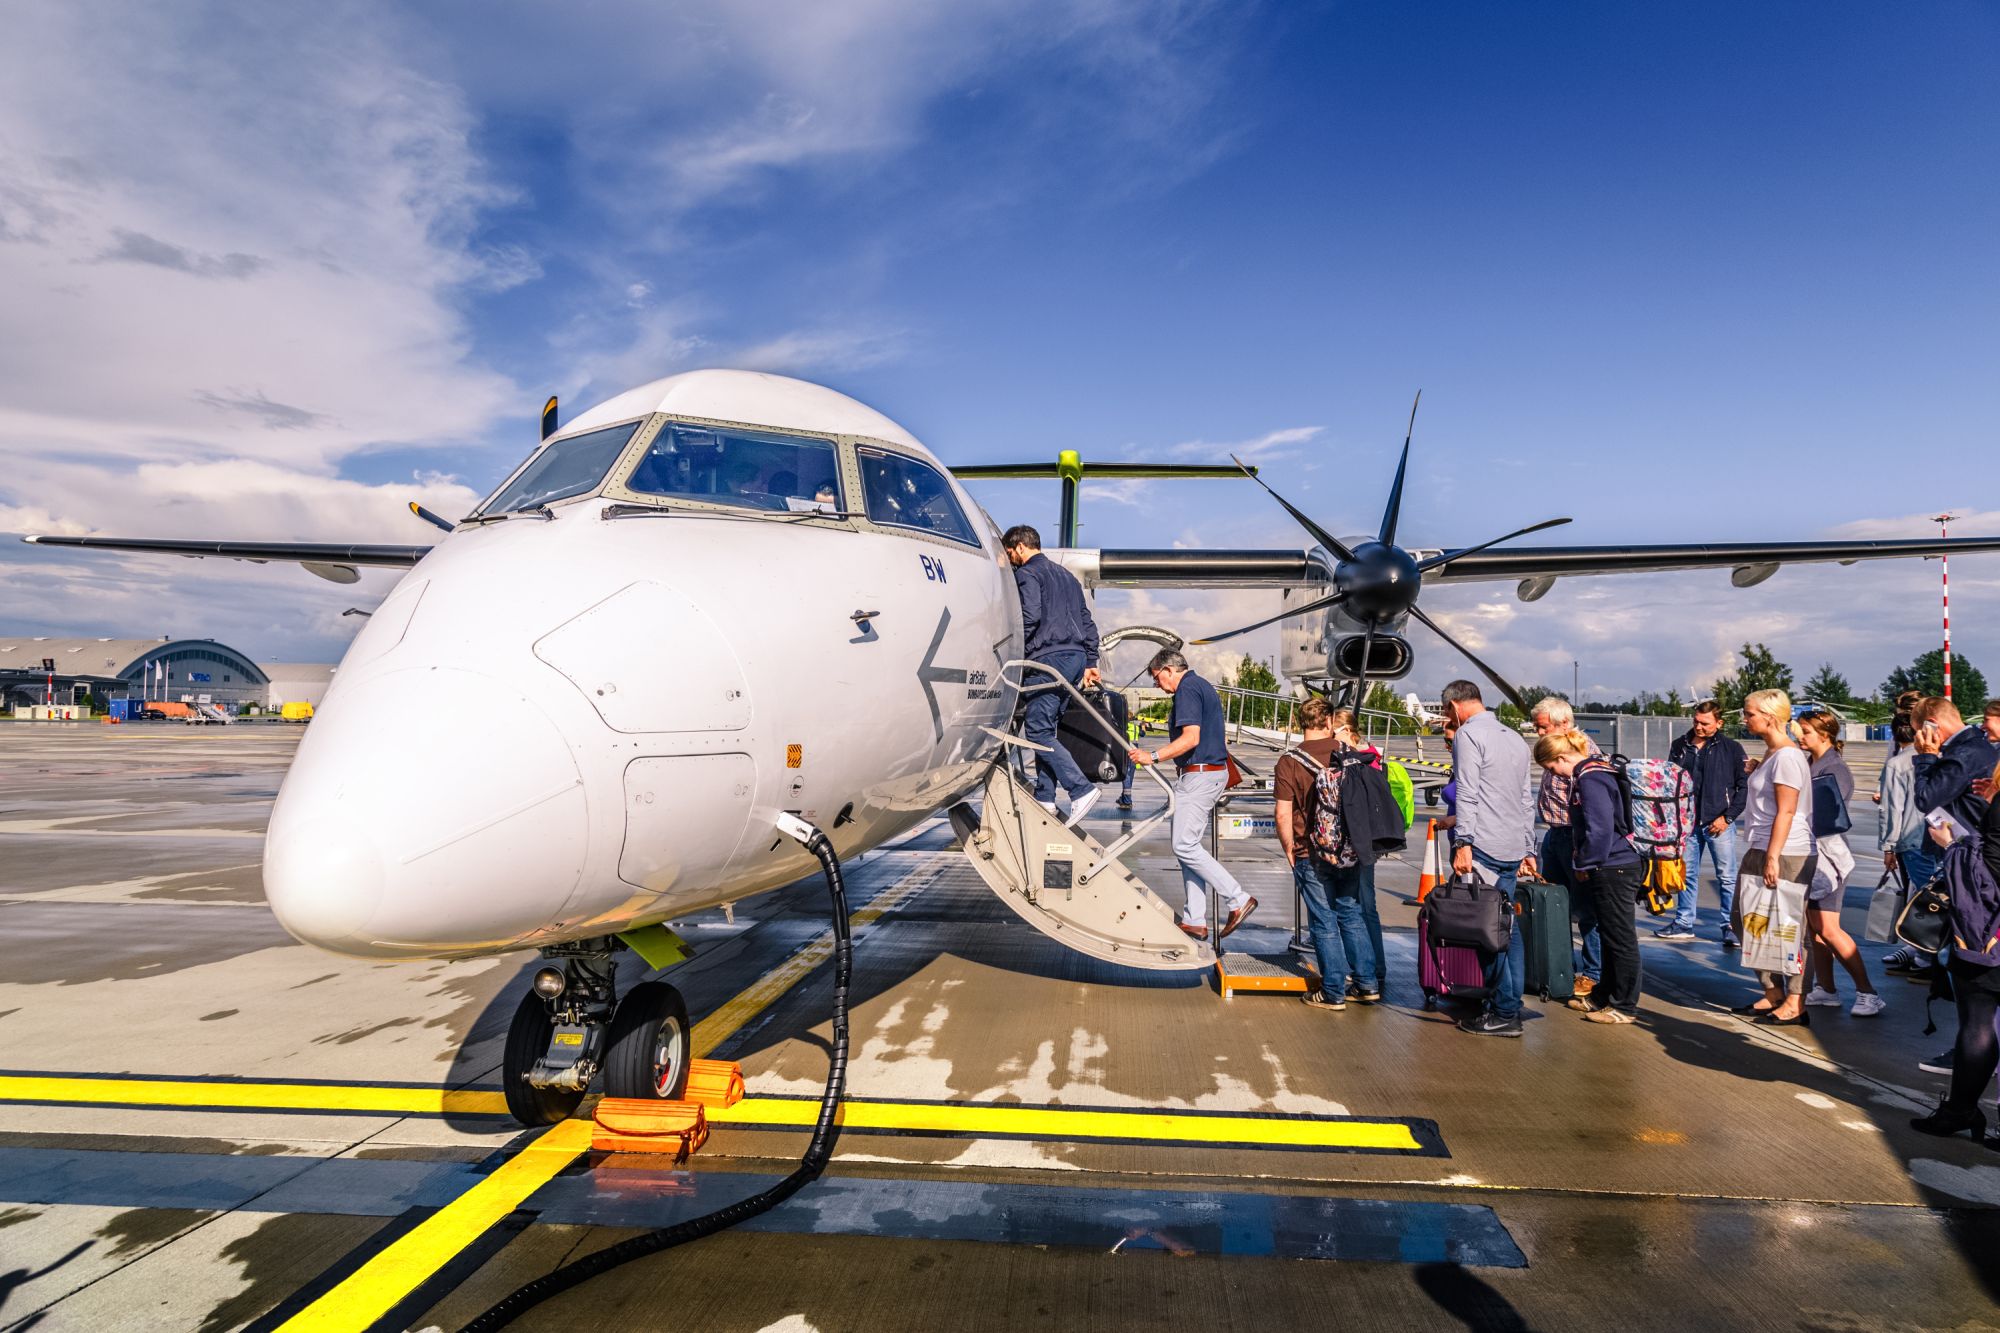 Generic image of passengers boarding a plane